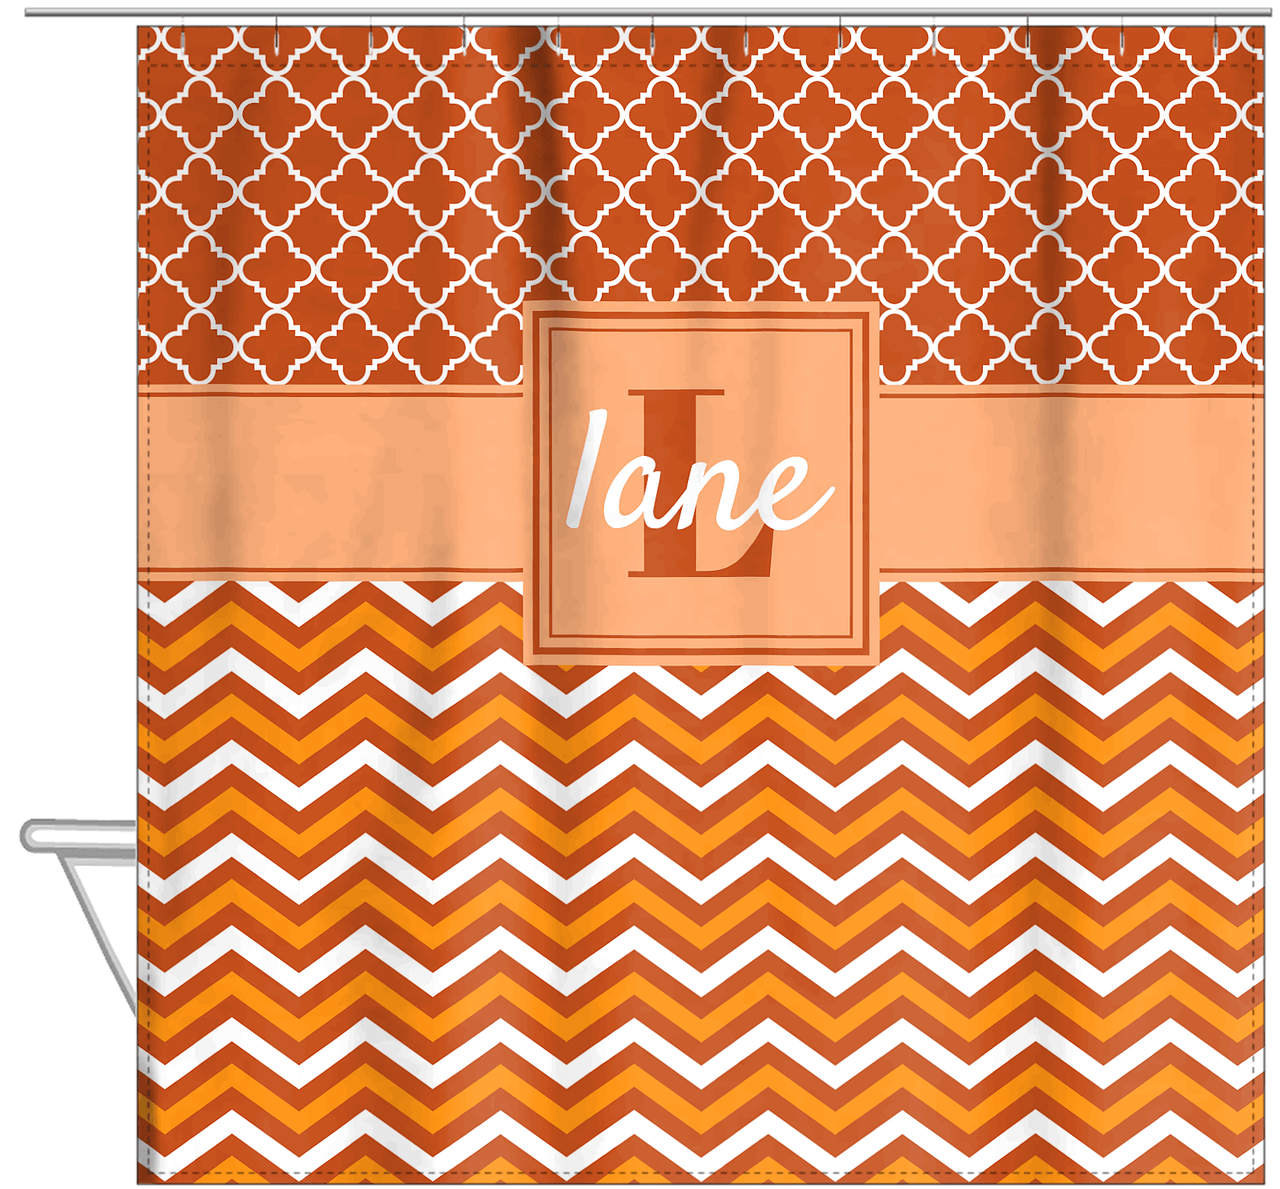 Personalized Quatrefoil and Chevron II Shower Curtain - Orange and White - Square Nameplate - Hanging View